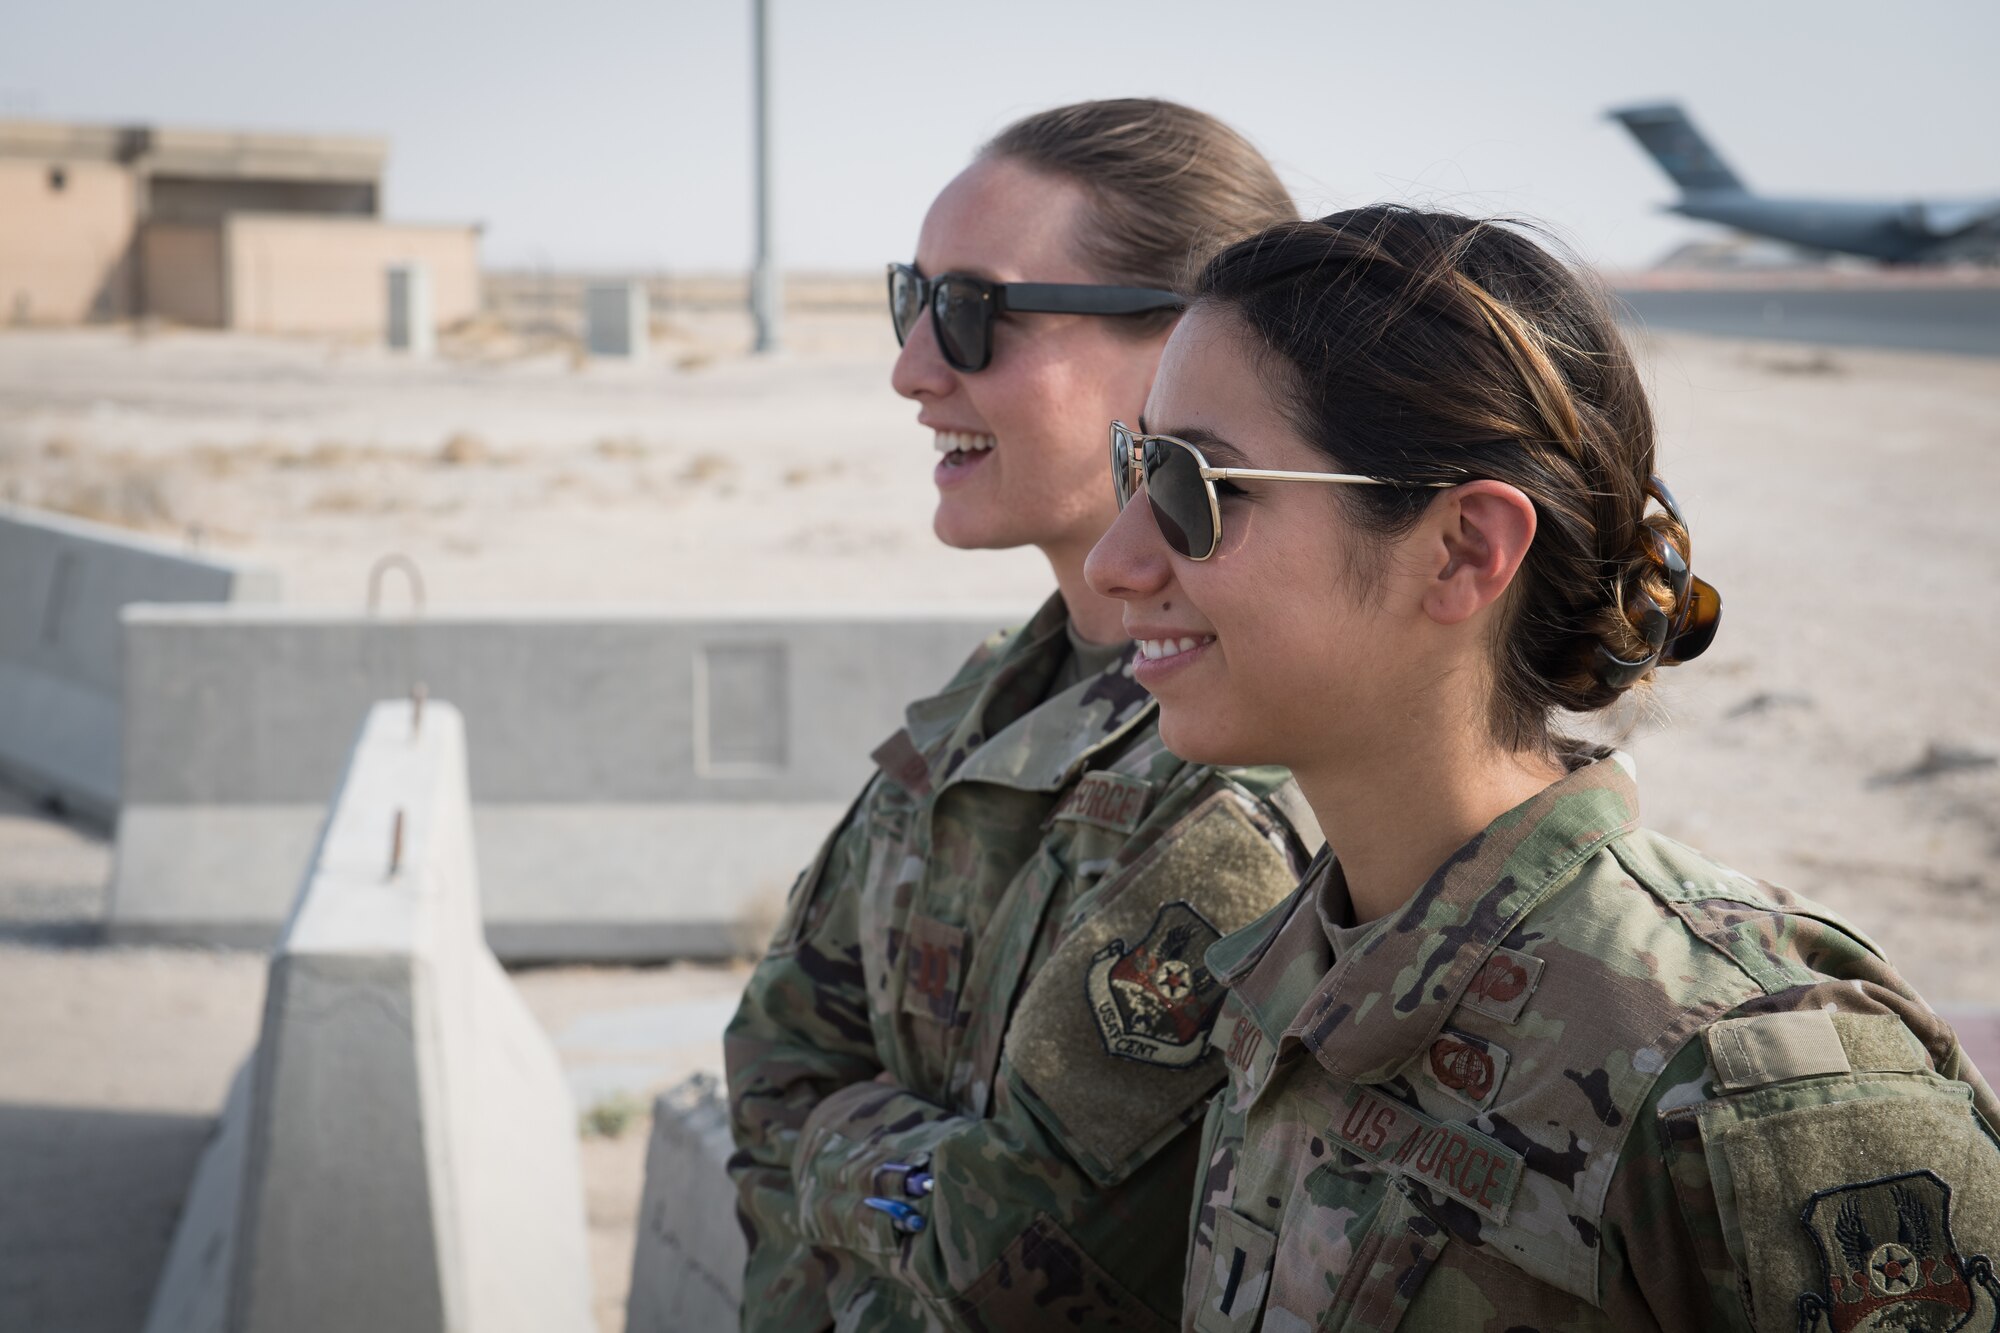 Capt. Rosa-Mae Bacon, 386th Air Expeditionary Wing, chief of protocol; and 1st Lt. Kassandra Prusko, 386th AEW deputy chief of protocol, have a friendly chat outside the protocol next to the flight line at Ali Al Salem Air Base, Kuwait, Aug. 15, 2019. Bacon is deployed from Davis-Monthan Air Force Base, Arizona; and Prusko is deployed from Andrews AFB, Maryland. (U.S. Air Force photo by Tech. Sgt. Daniel Martinez)